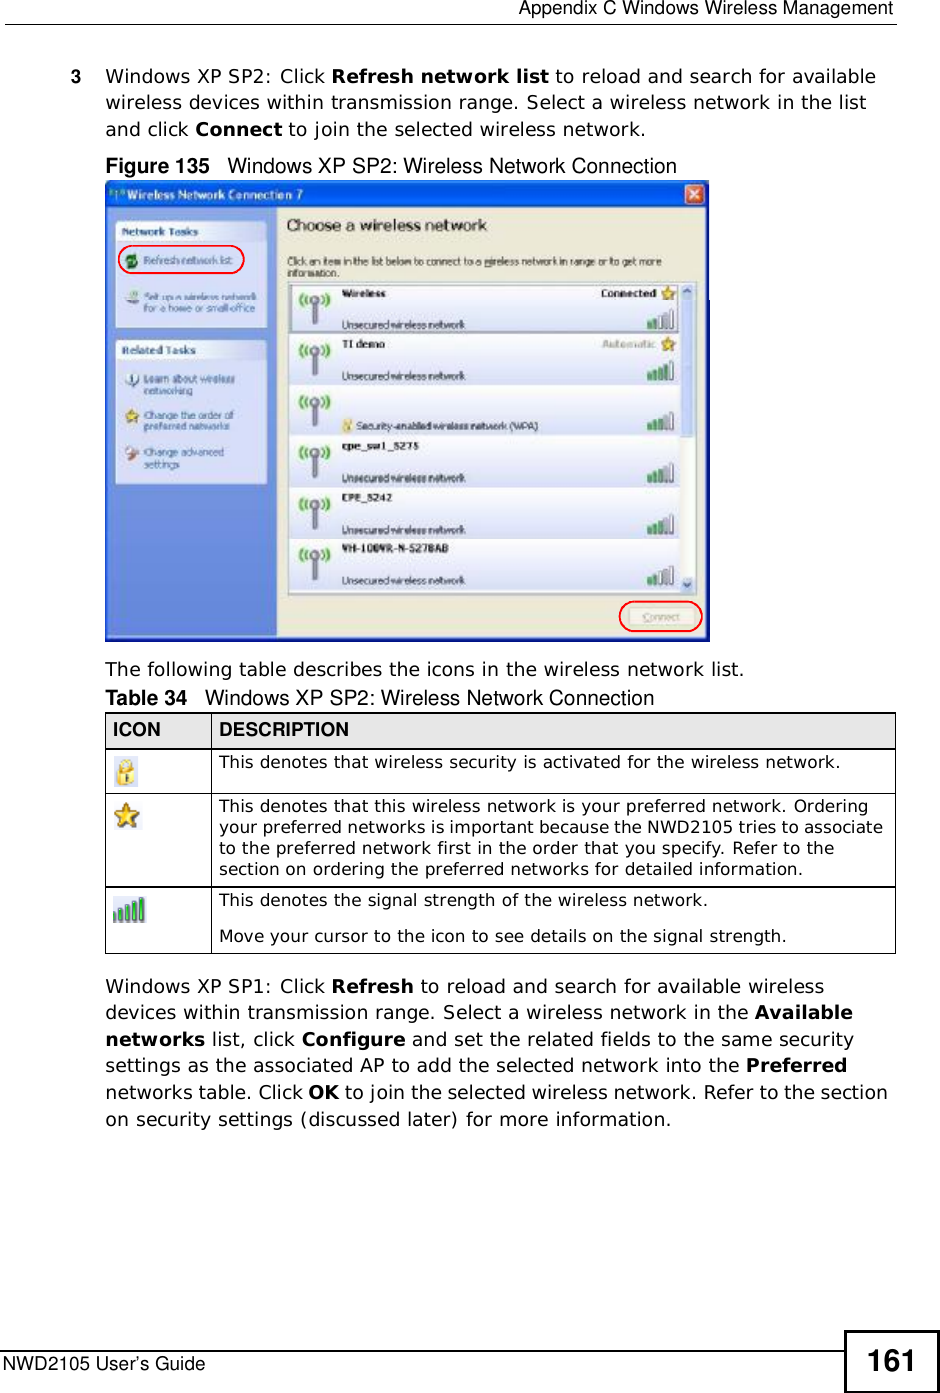  Appendix CWindows Wireless ManagementNWD2105 User’s Guide 1613Windows XP SP2: Click Refresh network list to reload and search for available wireless devices within transmission range. Select a wireless network in the list and click Connect to join the selected wireless network.Figure 135   Windows XP SP2: Wireless Network ConnectionThe following table describes the icons in the wireless network list.Windows XP SP1: Click Refresh to reload and search for available wireless devices within transmission range. Select a wireless network in the Available networks list, click Configure and set the related fields to the same security settings as the associated AP to add the selected network into the Preferred networks table. Click OK to join the selected wireless network. Refer to the section on security settings (discussed later) for more information. Table 34   Windows XP SP2: Wireless Network ConnectionICON DESCRIPTIONThis denotes that wireless security is activated for the wireless network.This denotes that this wireless network is your preferred network. Ordering your preferred networks is important because the NWD2105 tries to associate to the preferred network first in the order that you specify. Refer to the section on ordering the preferred networks for detailed information.This denotes the signal strength of the wireless network.Move your cursor to the icon to see details on the signal strength.